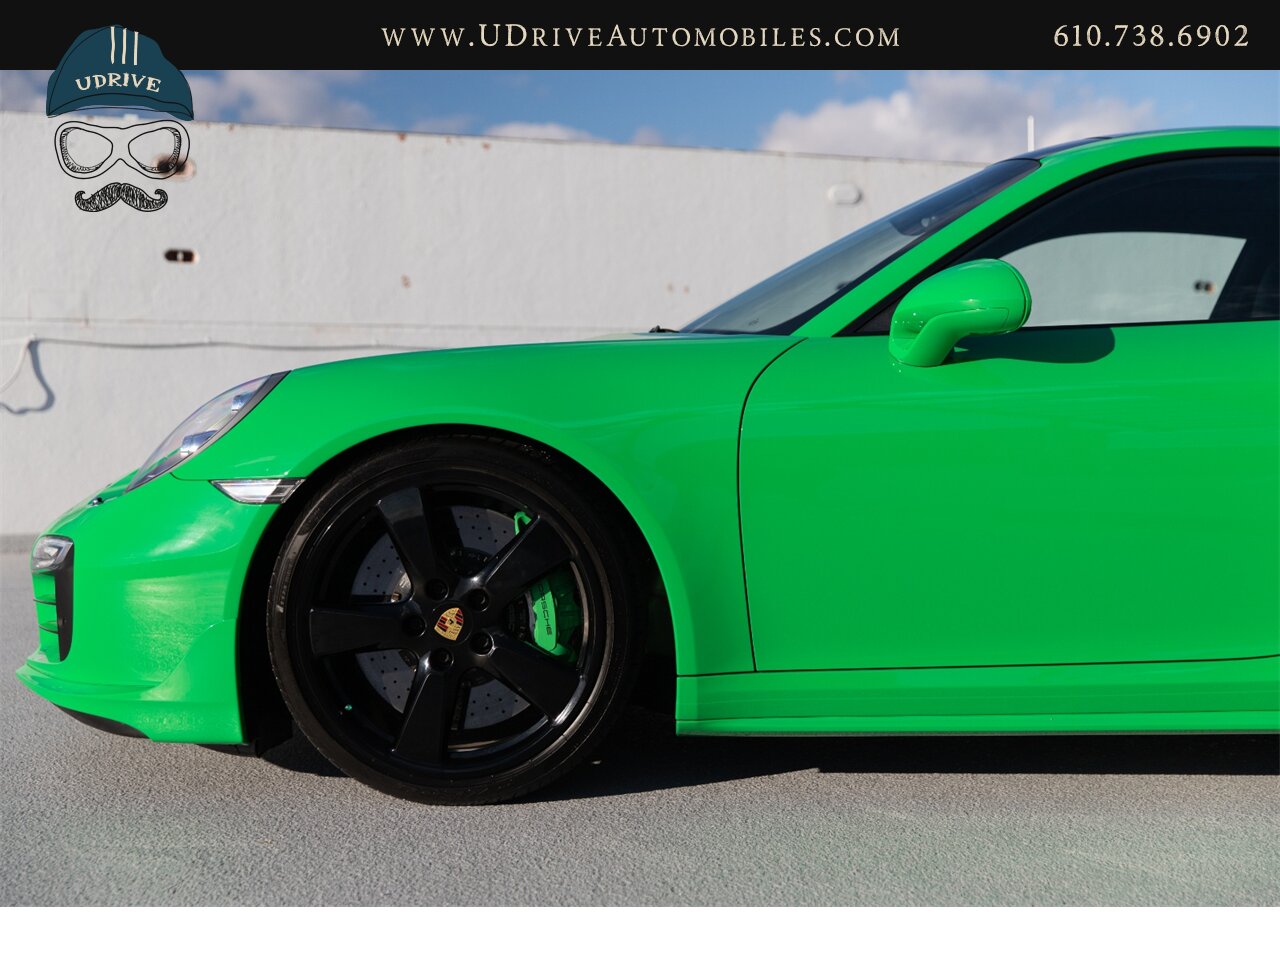 2016 Porsche 911 Turbo S PTS Viper Green Aerokit $203k MSRP  Painted Side Skirts Painted Grilles Wheels in Black - Photo 7 - West Chester, PA 19382